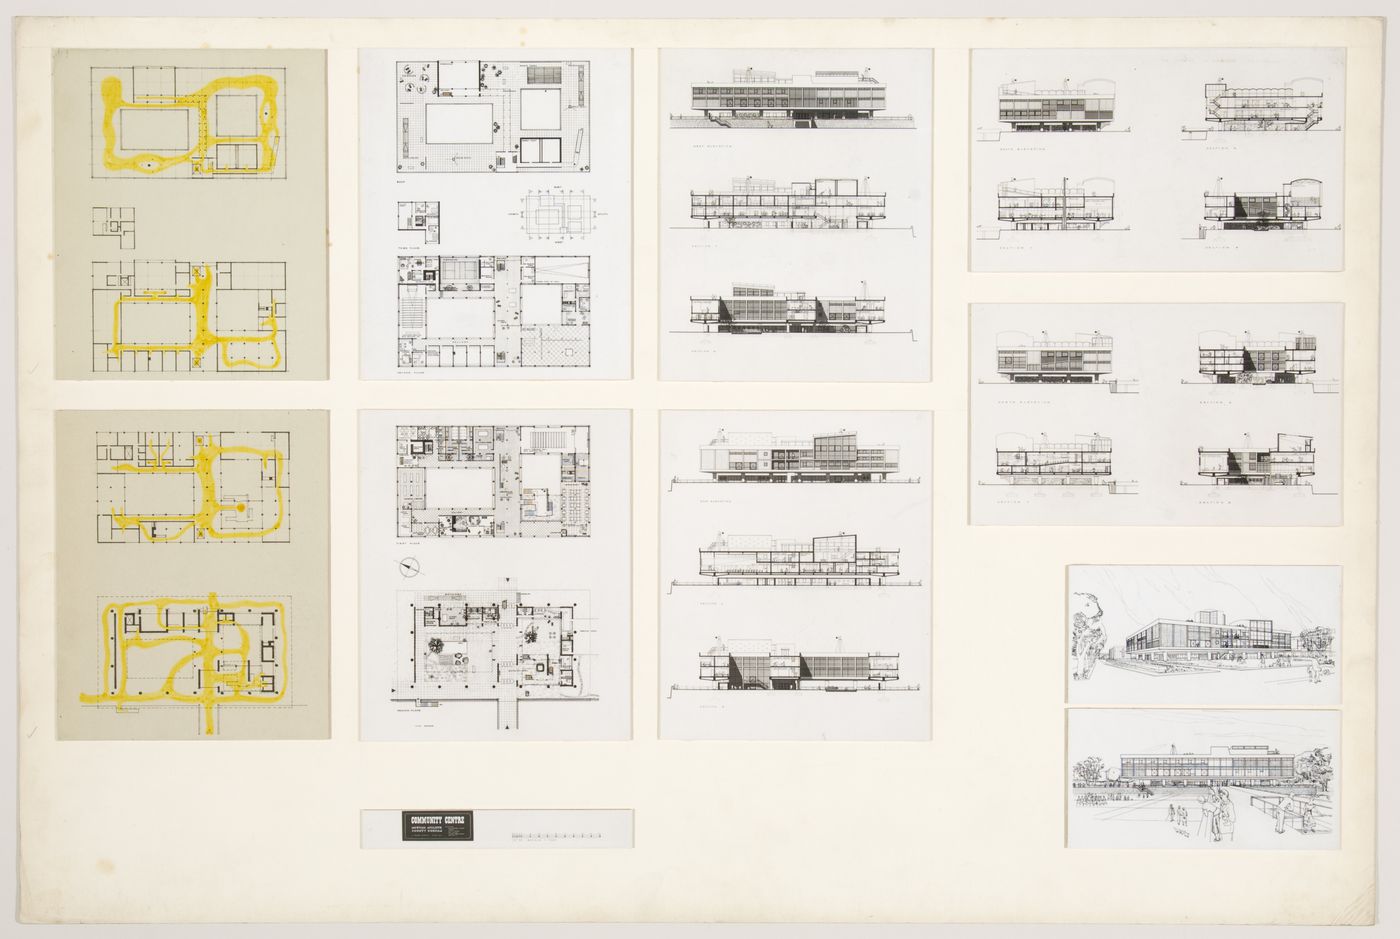 Town centre and community centre, Newton Aycliffe, England (thesis, Liverpool School of Architecture): plans and views of plans, elevations, sections and perspectives